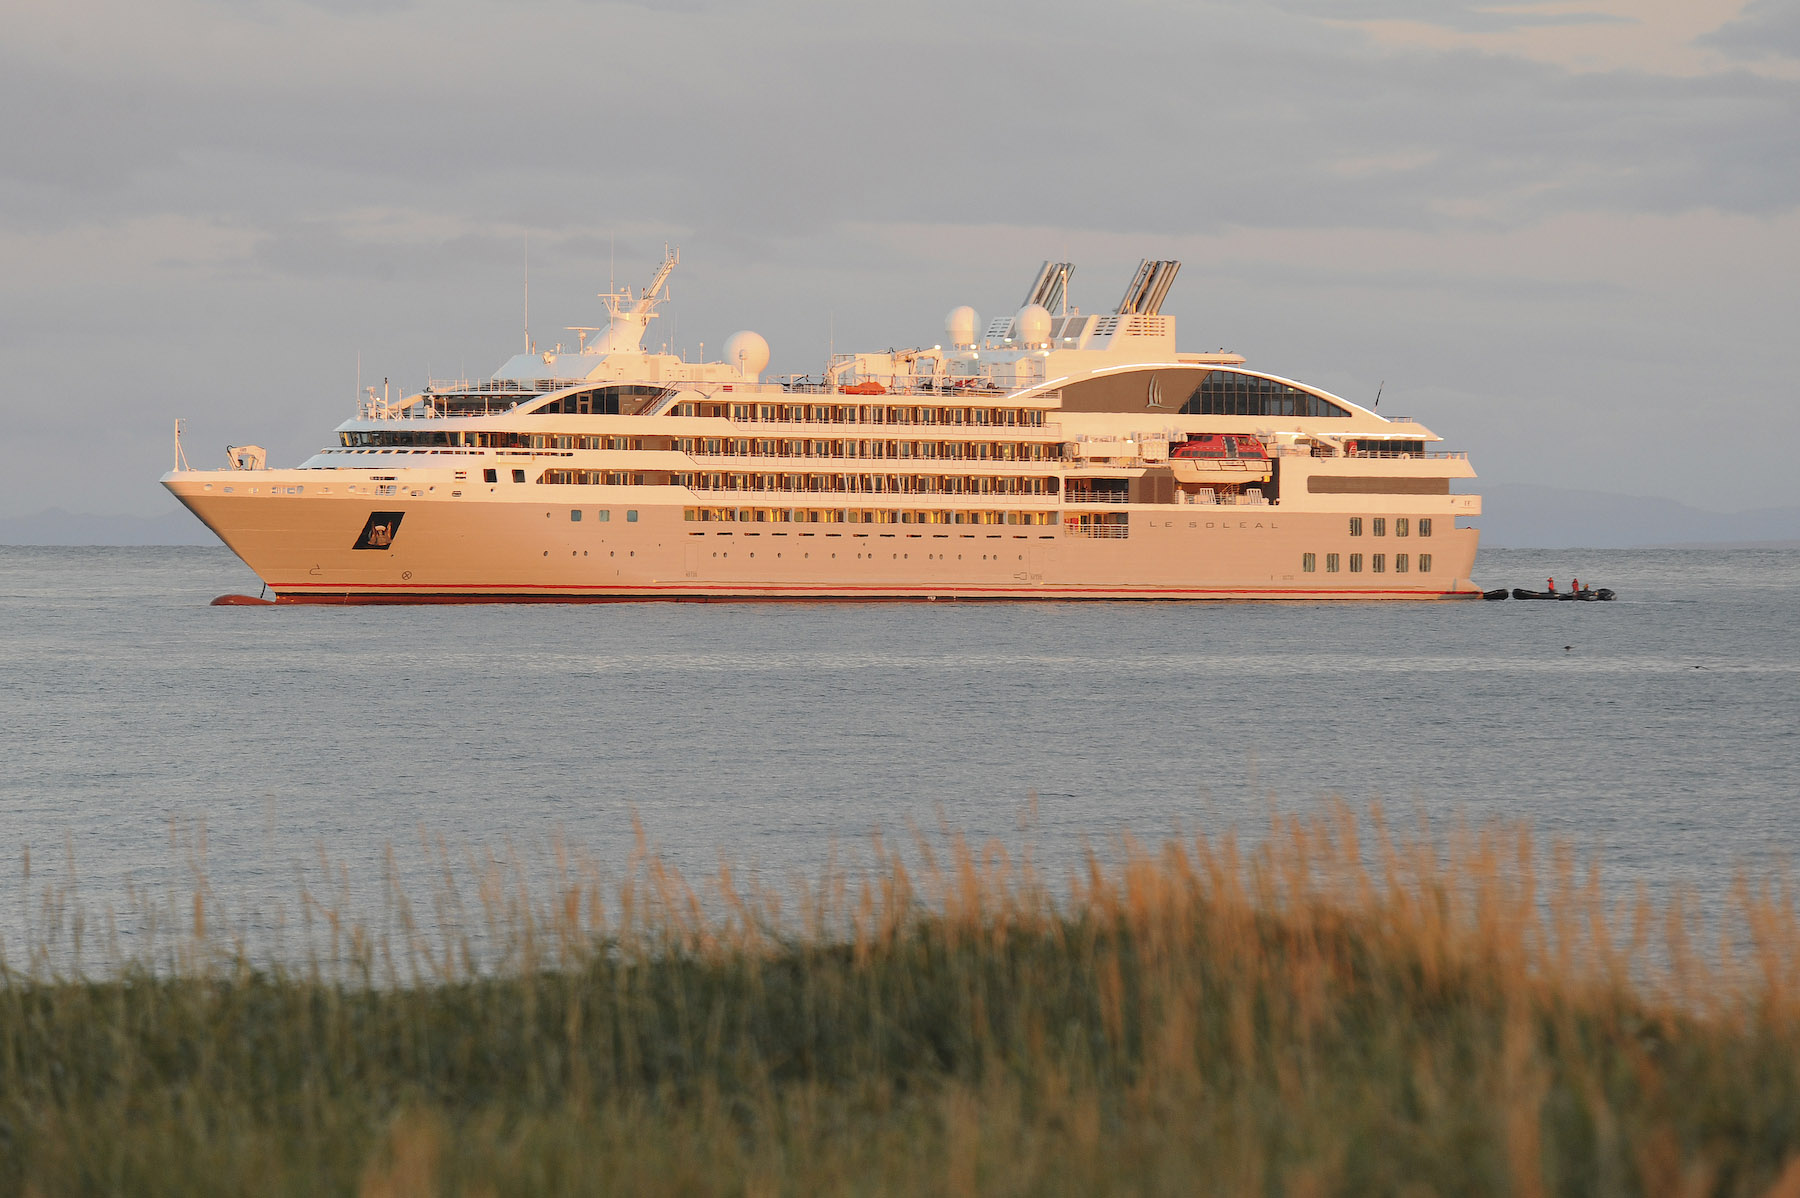 For the first time in history, boutique ships will be berthed at the OPT